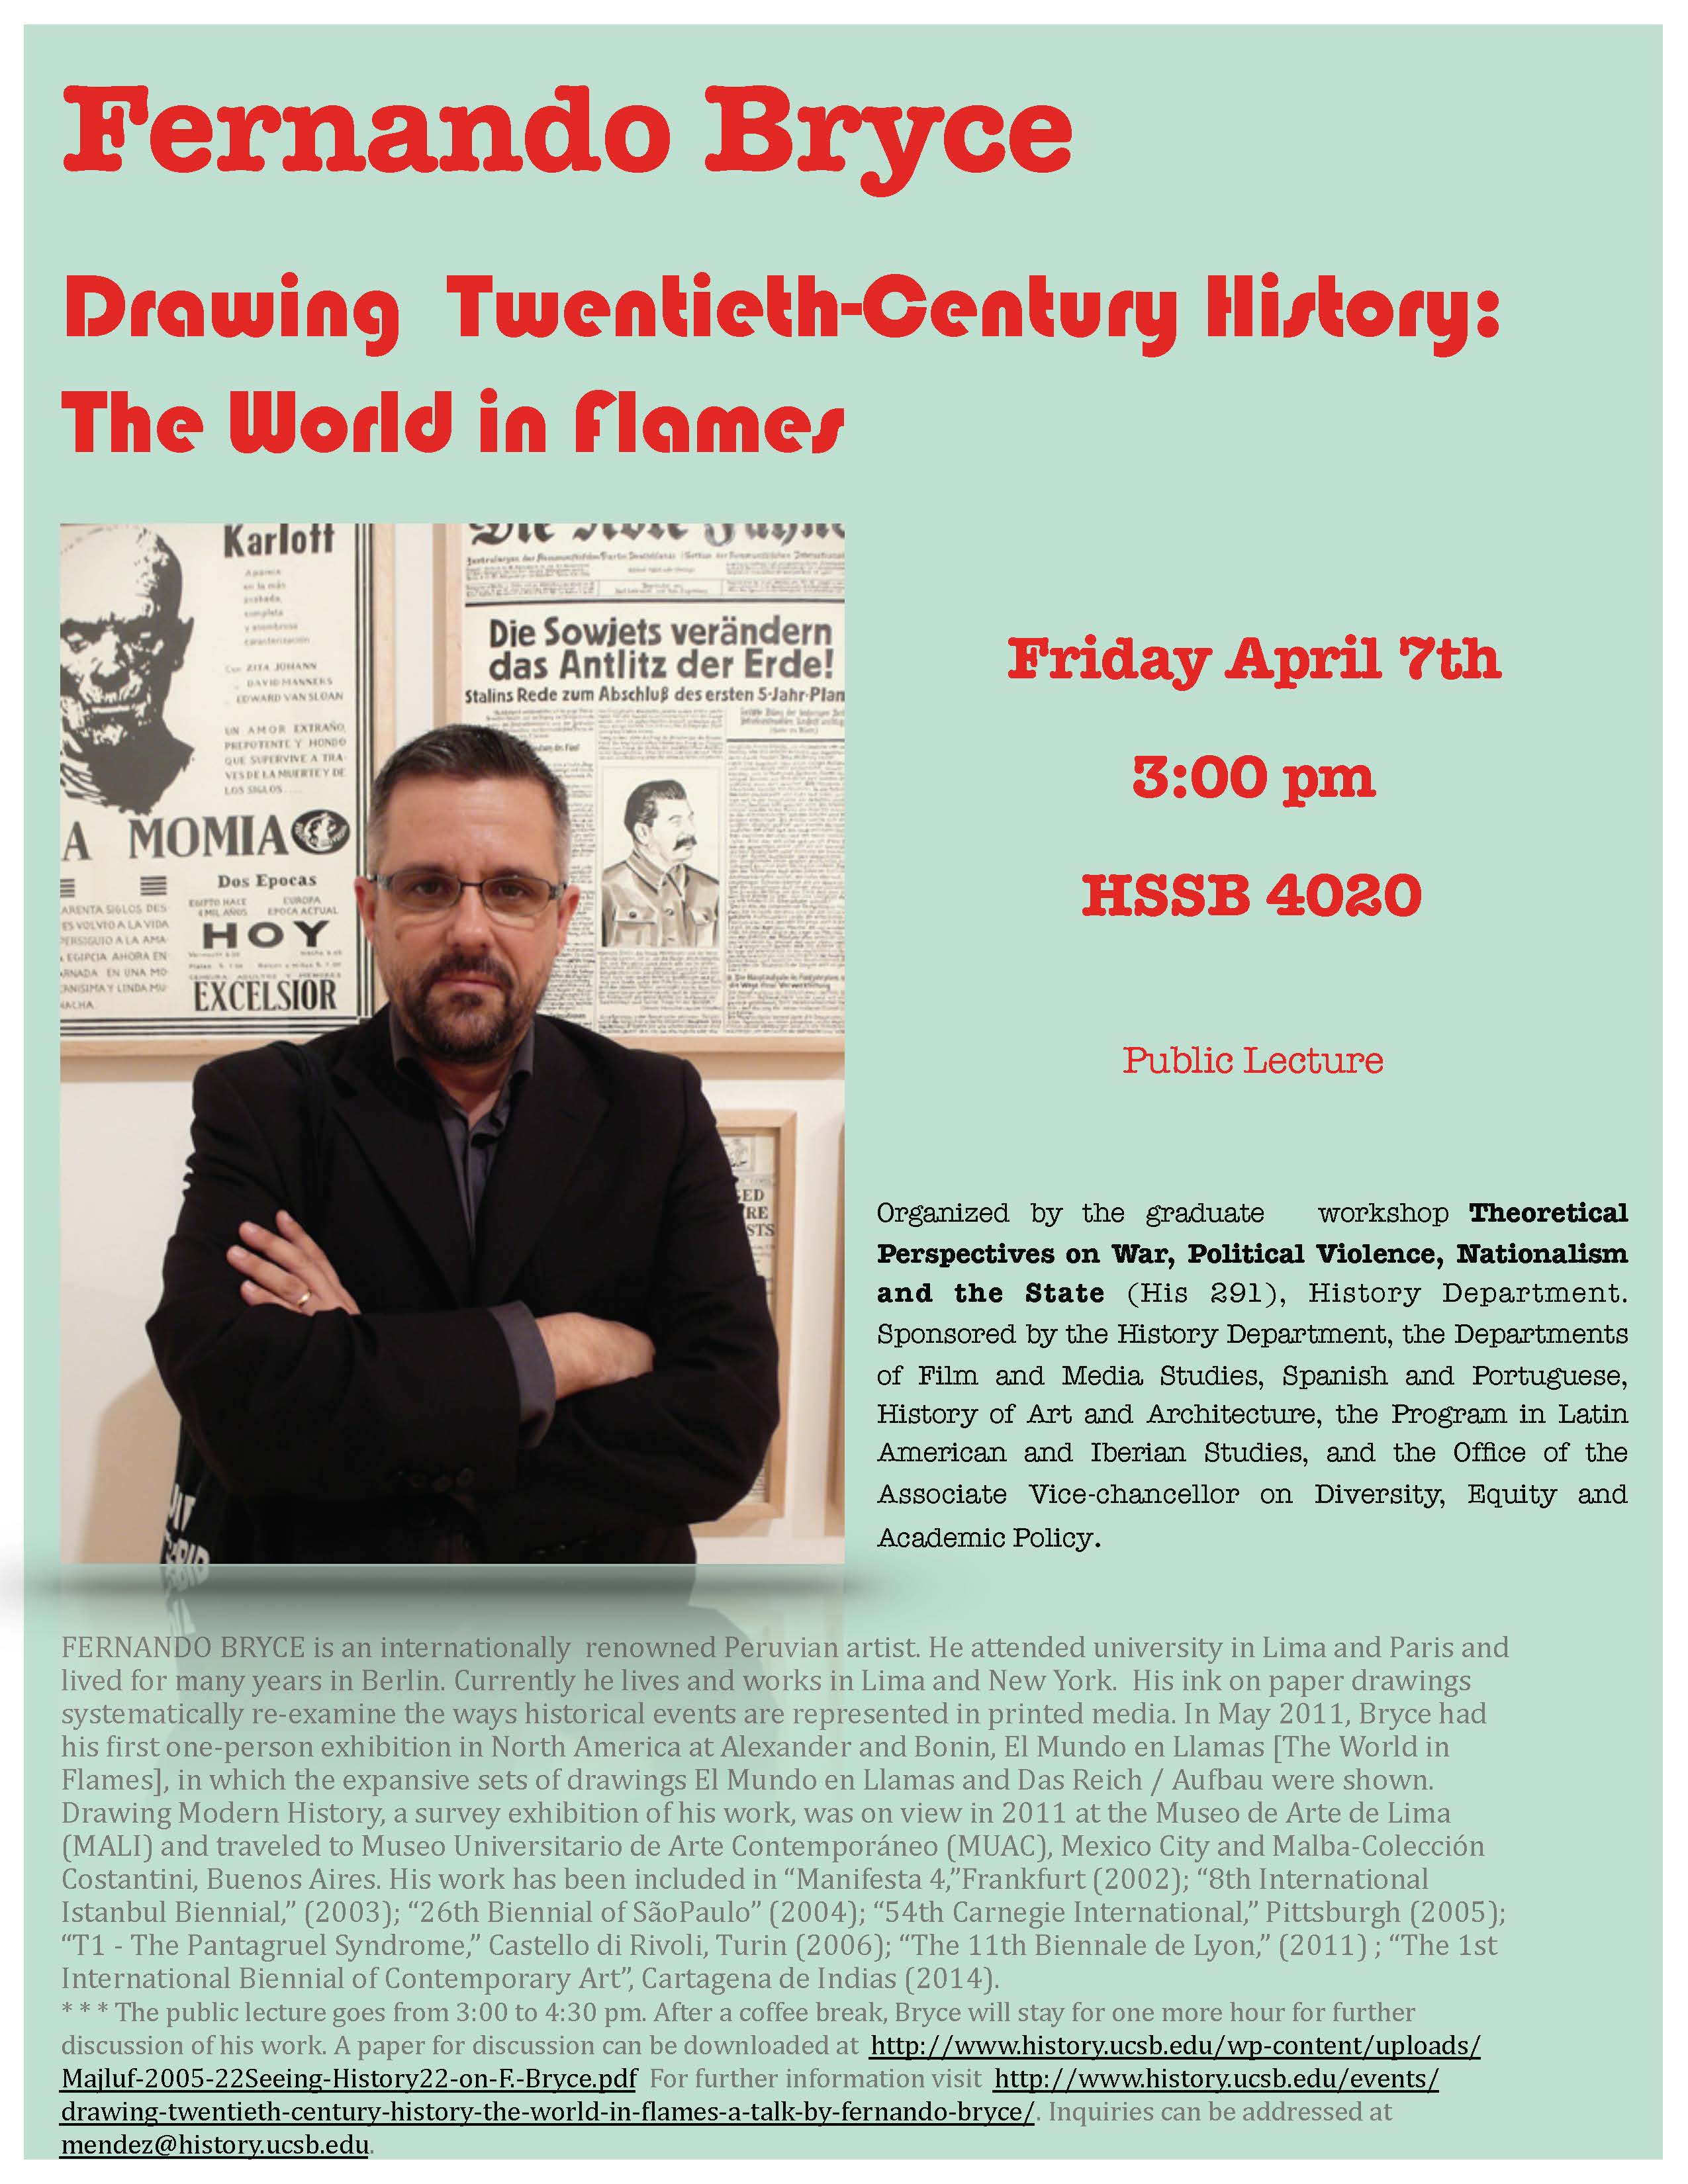 flyer for lecture by Fernando Bryce tiled "Drawing Twentieth Century History: The World in flames" April 2017